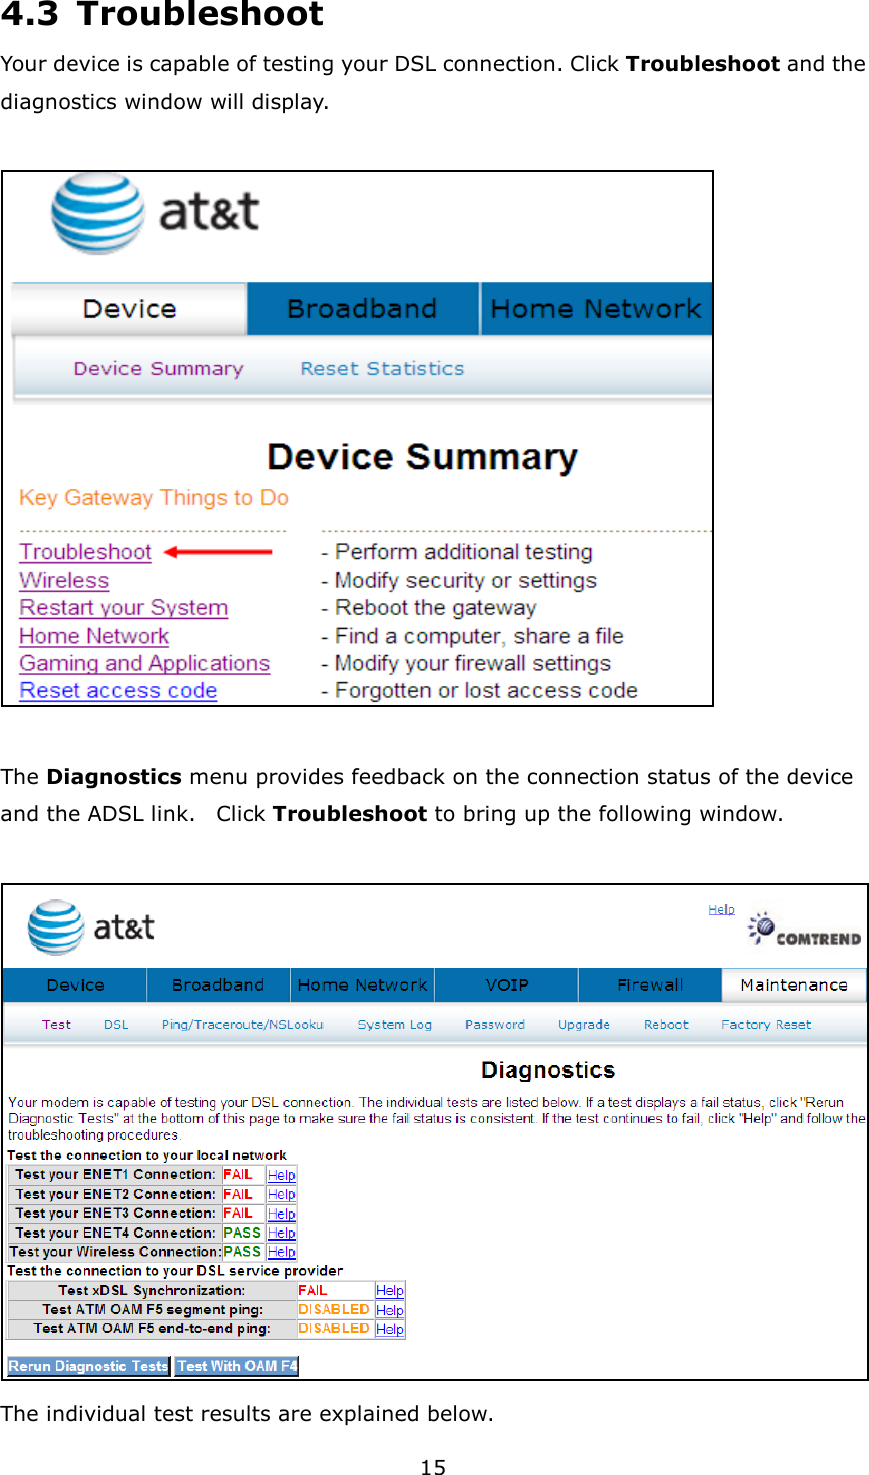 15 4.3  Troubleshoot Your device is capable of testing your DSL connection. Click Troubleshoot and the diagnostics window will display.    The Diagnostics menu provides feedback on the connection status of the device and the ADSL link.    Click Troubleshoot to bring up the following window.   The individual test results are explained below. 